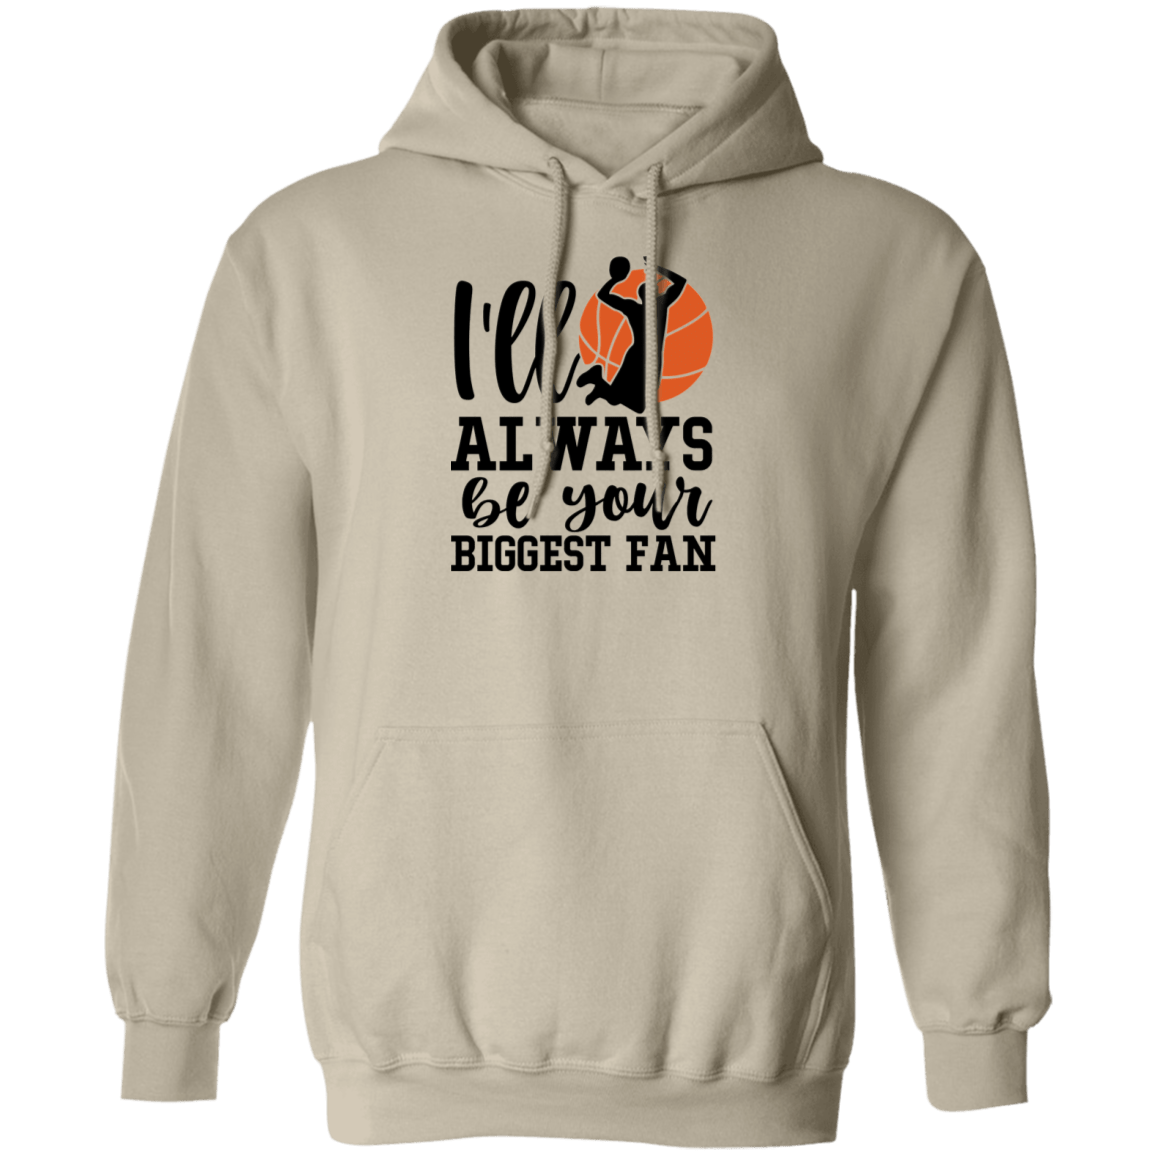 Your biggest fan...Pullover Hoodie